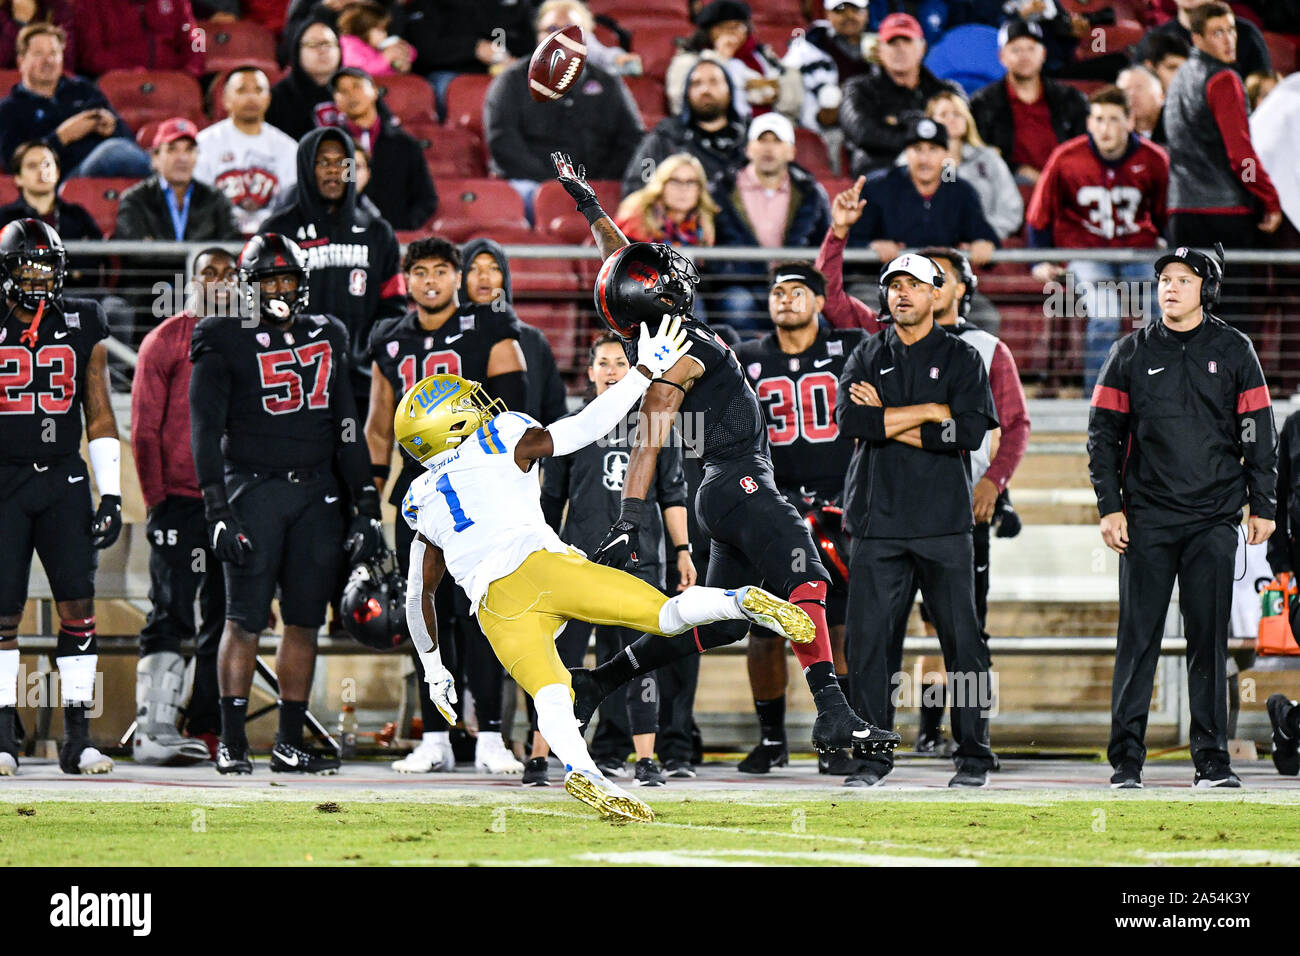 Stanford, California, USA. 17th Oct, 2019. That ball is just a little too high for Stanford Cardinal wide receiver Connor Wedington (5) being defended by UCLA Bruins defensive back Darnay Holmes (1) during the NCAA football game between the UCLA Bruins and the Stanford Cardinal at Stanford Stadium in Stanford, California. Chris Brown/CSM/Alamy Live News Stock Photo